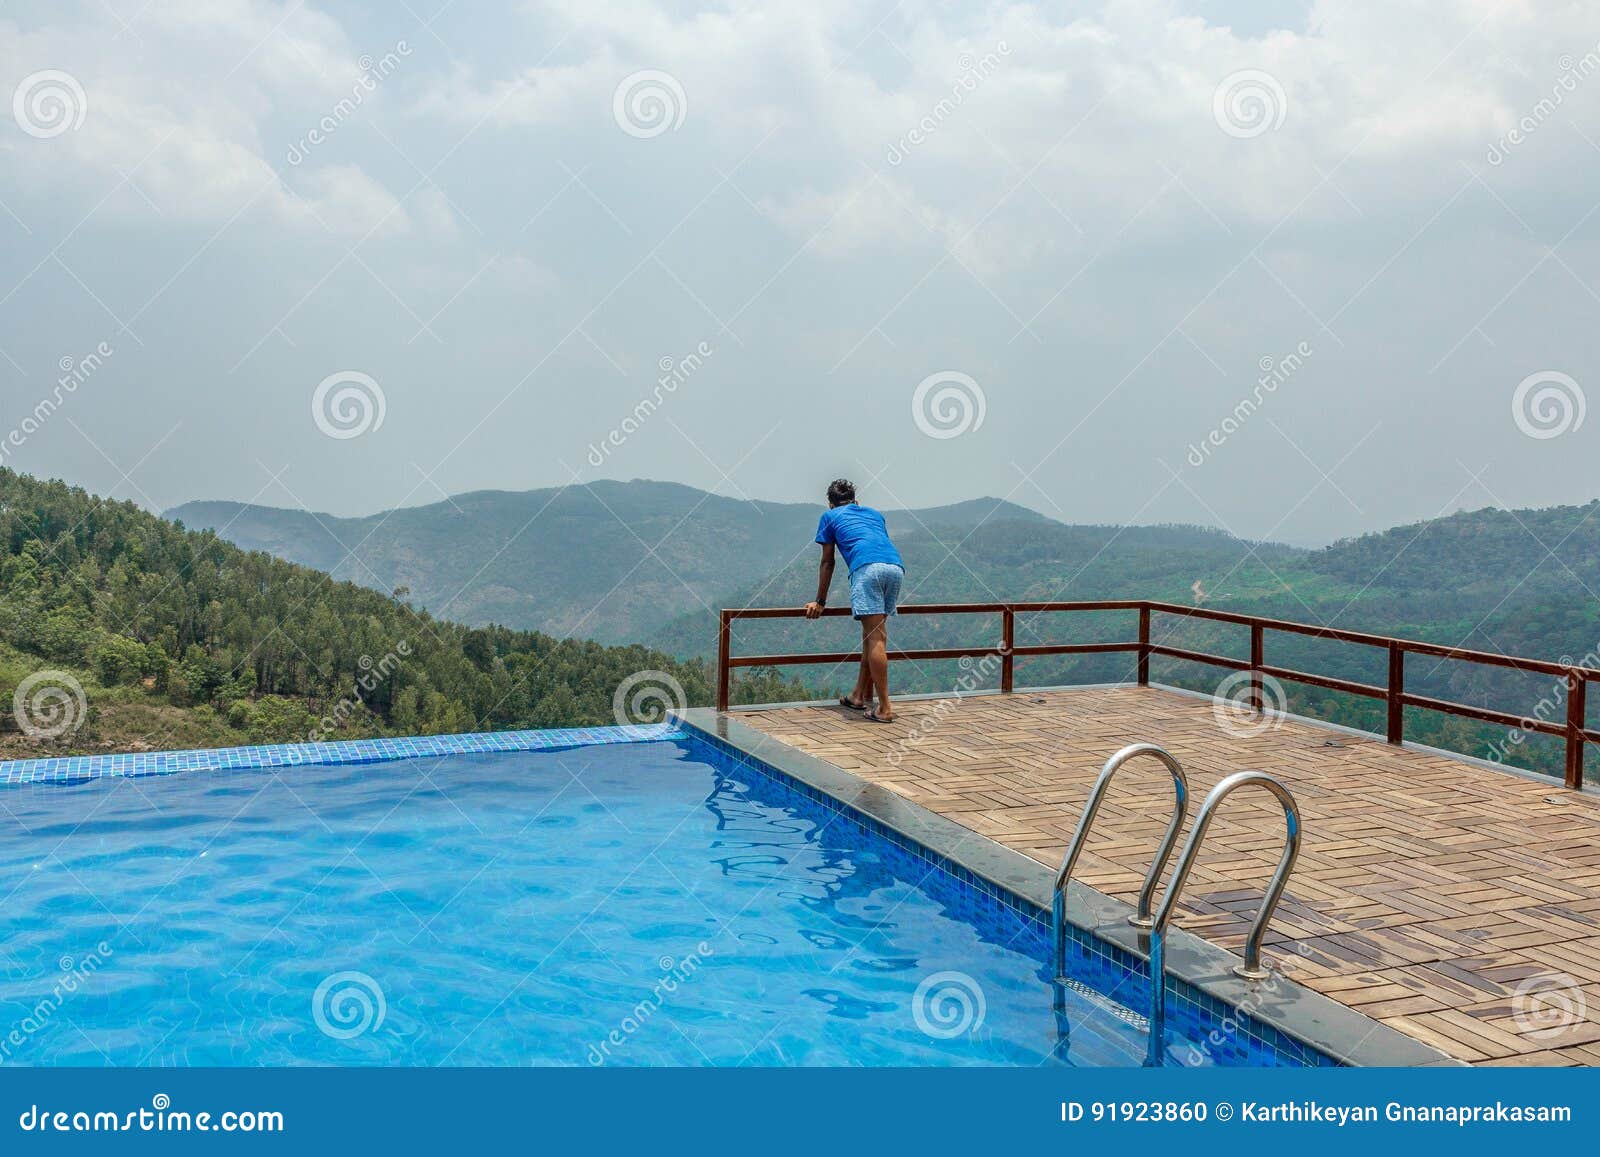 View of Swimming Pool on Top of a Hill Station with Mountain in the  Background, Salem, Yercaud, Tamilnadu, India, April 29 2017 Editorial Image  - Image of outdoor, hotel: 91923860